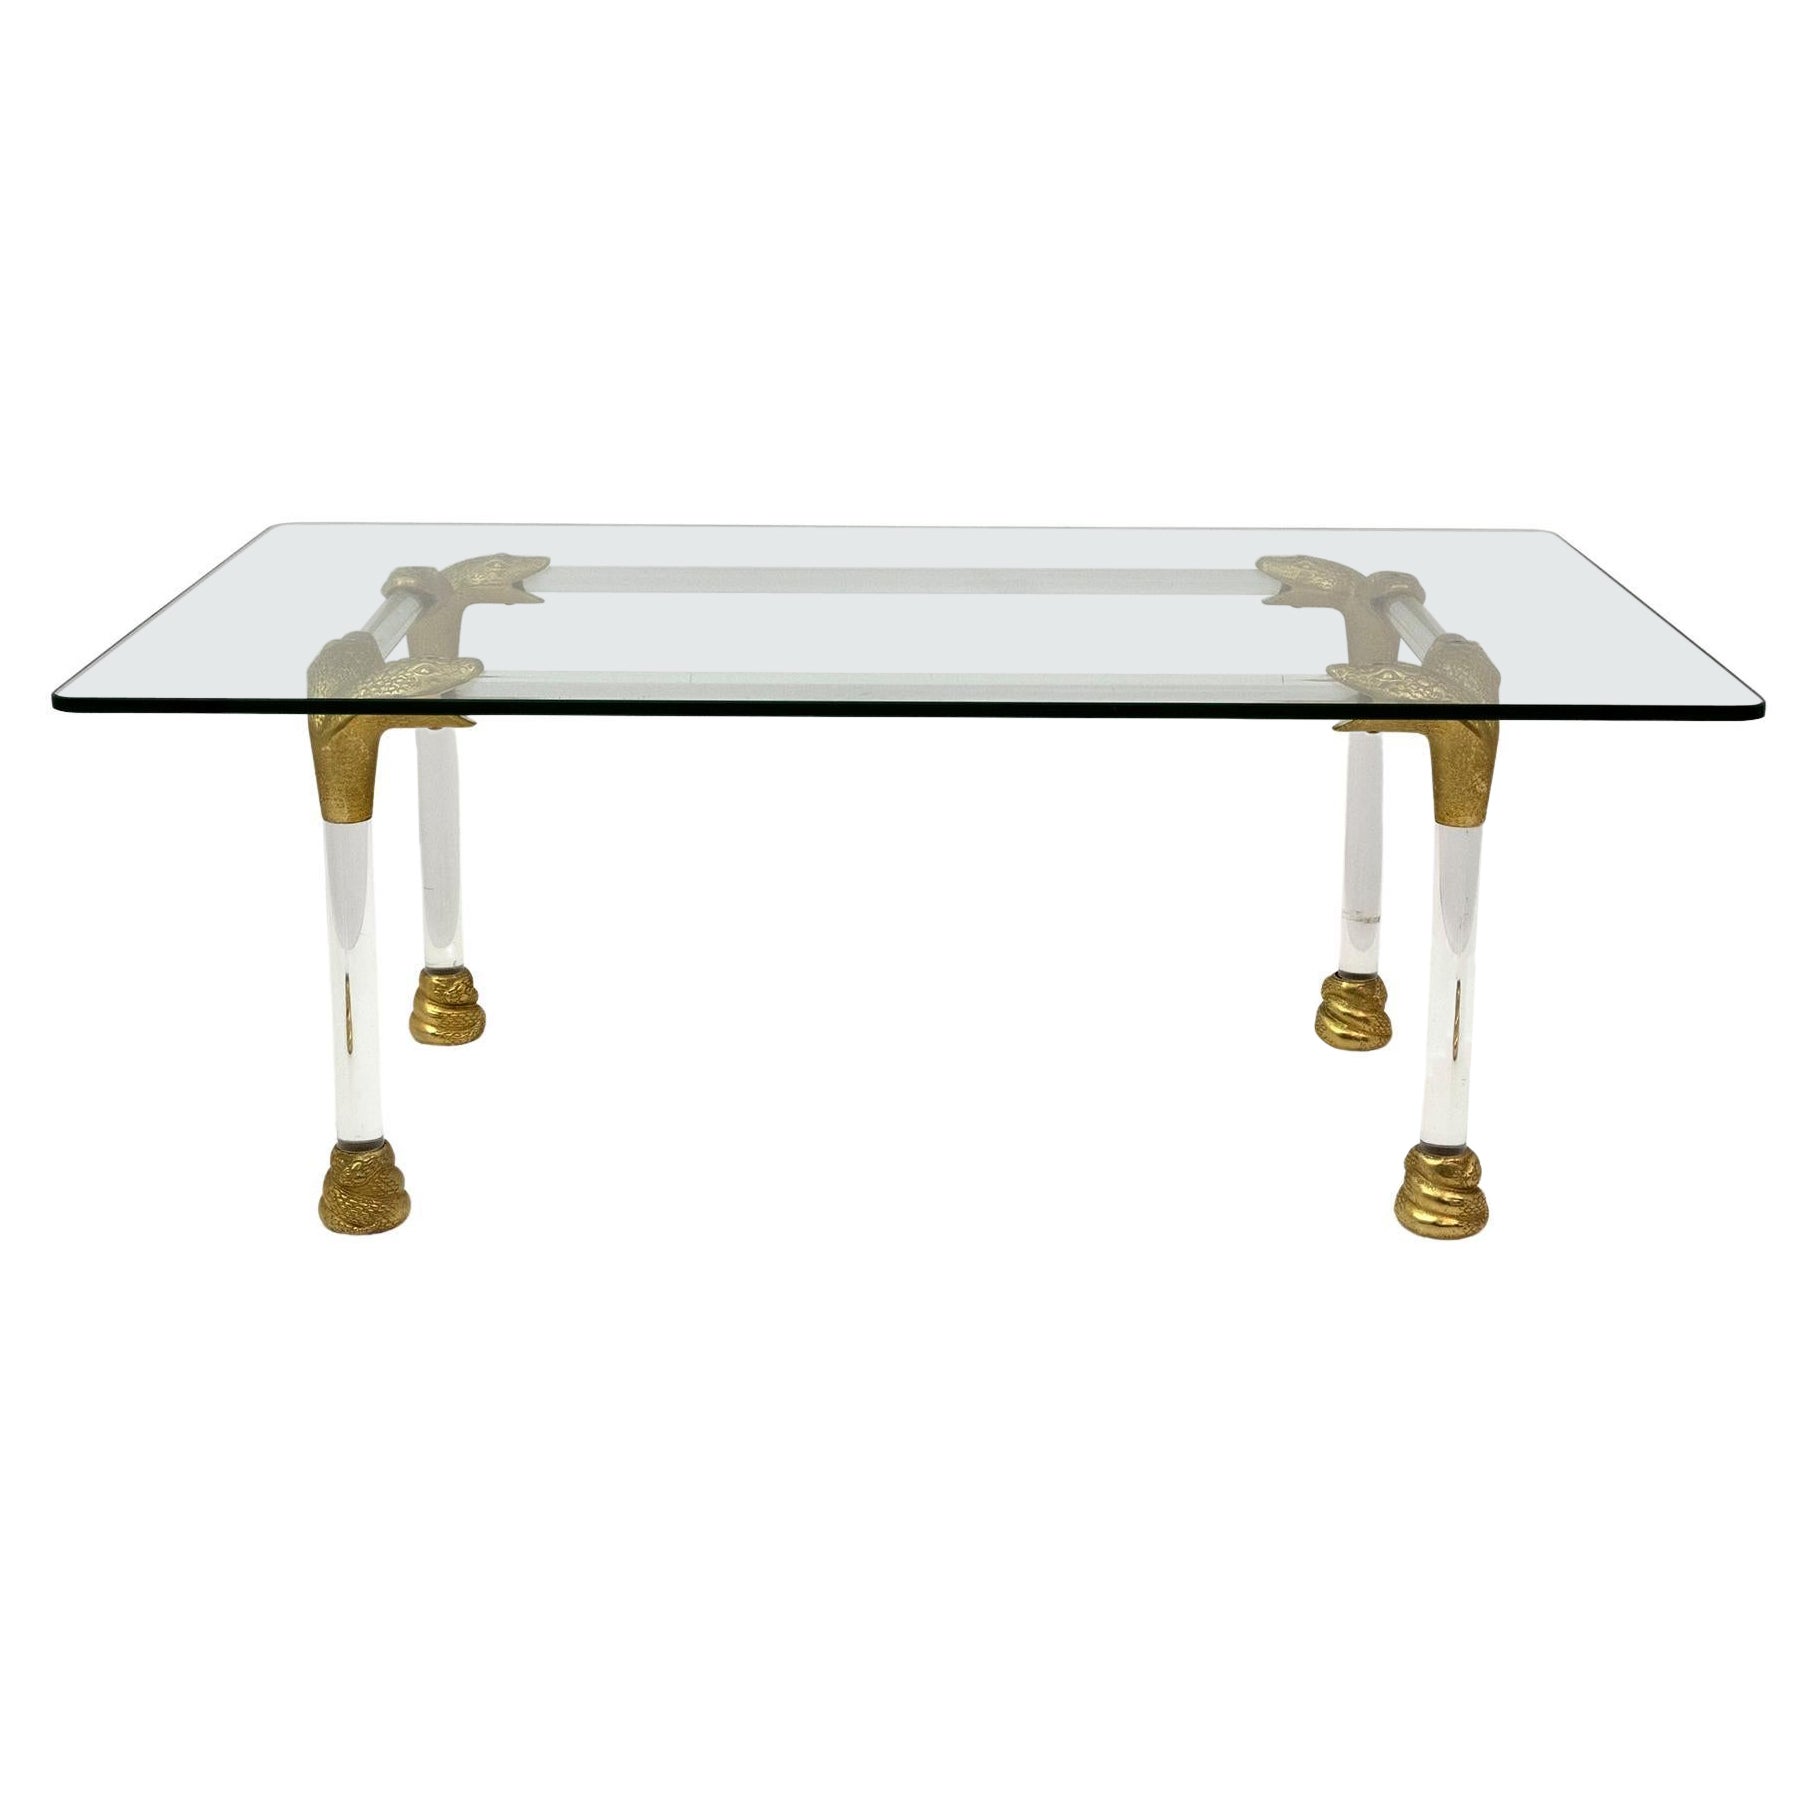 Mid-Century Lucite and Brass Italian Coffee Table with Snake Head Details, 1970s